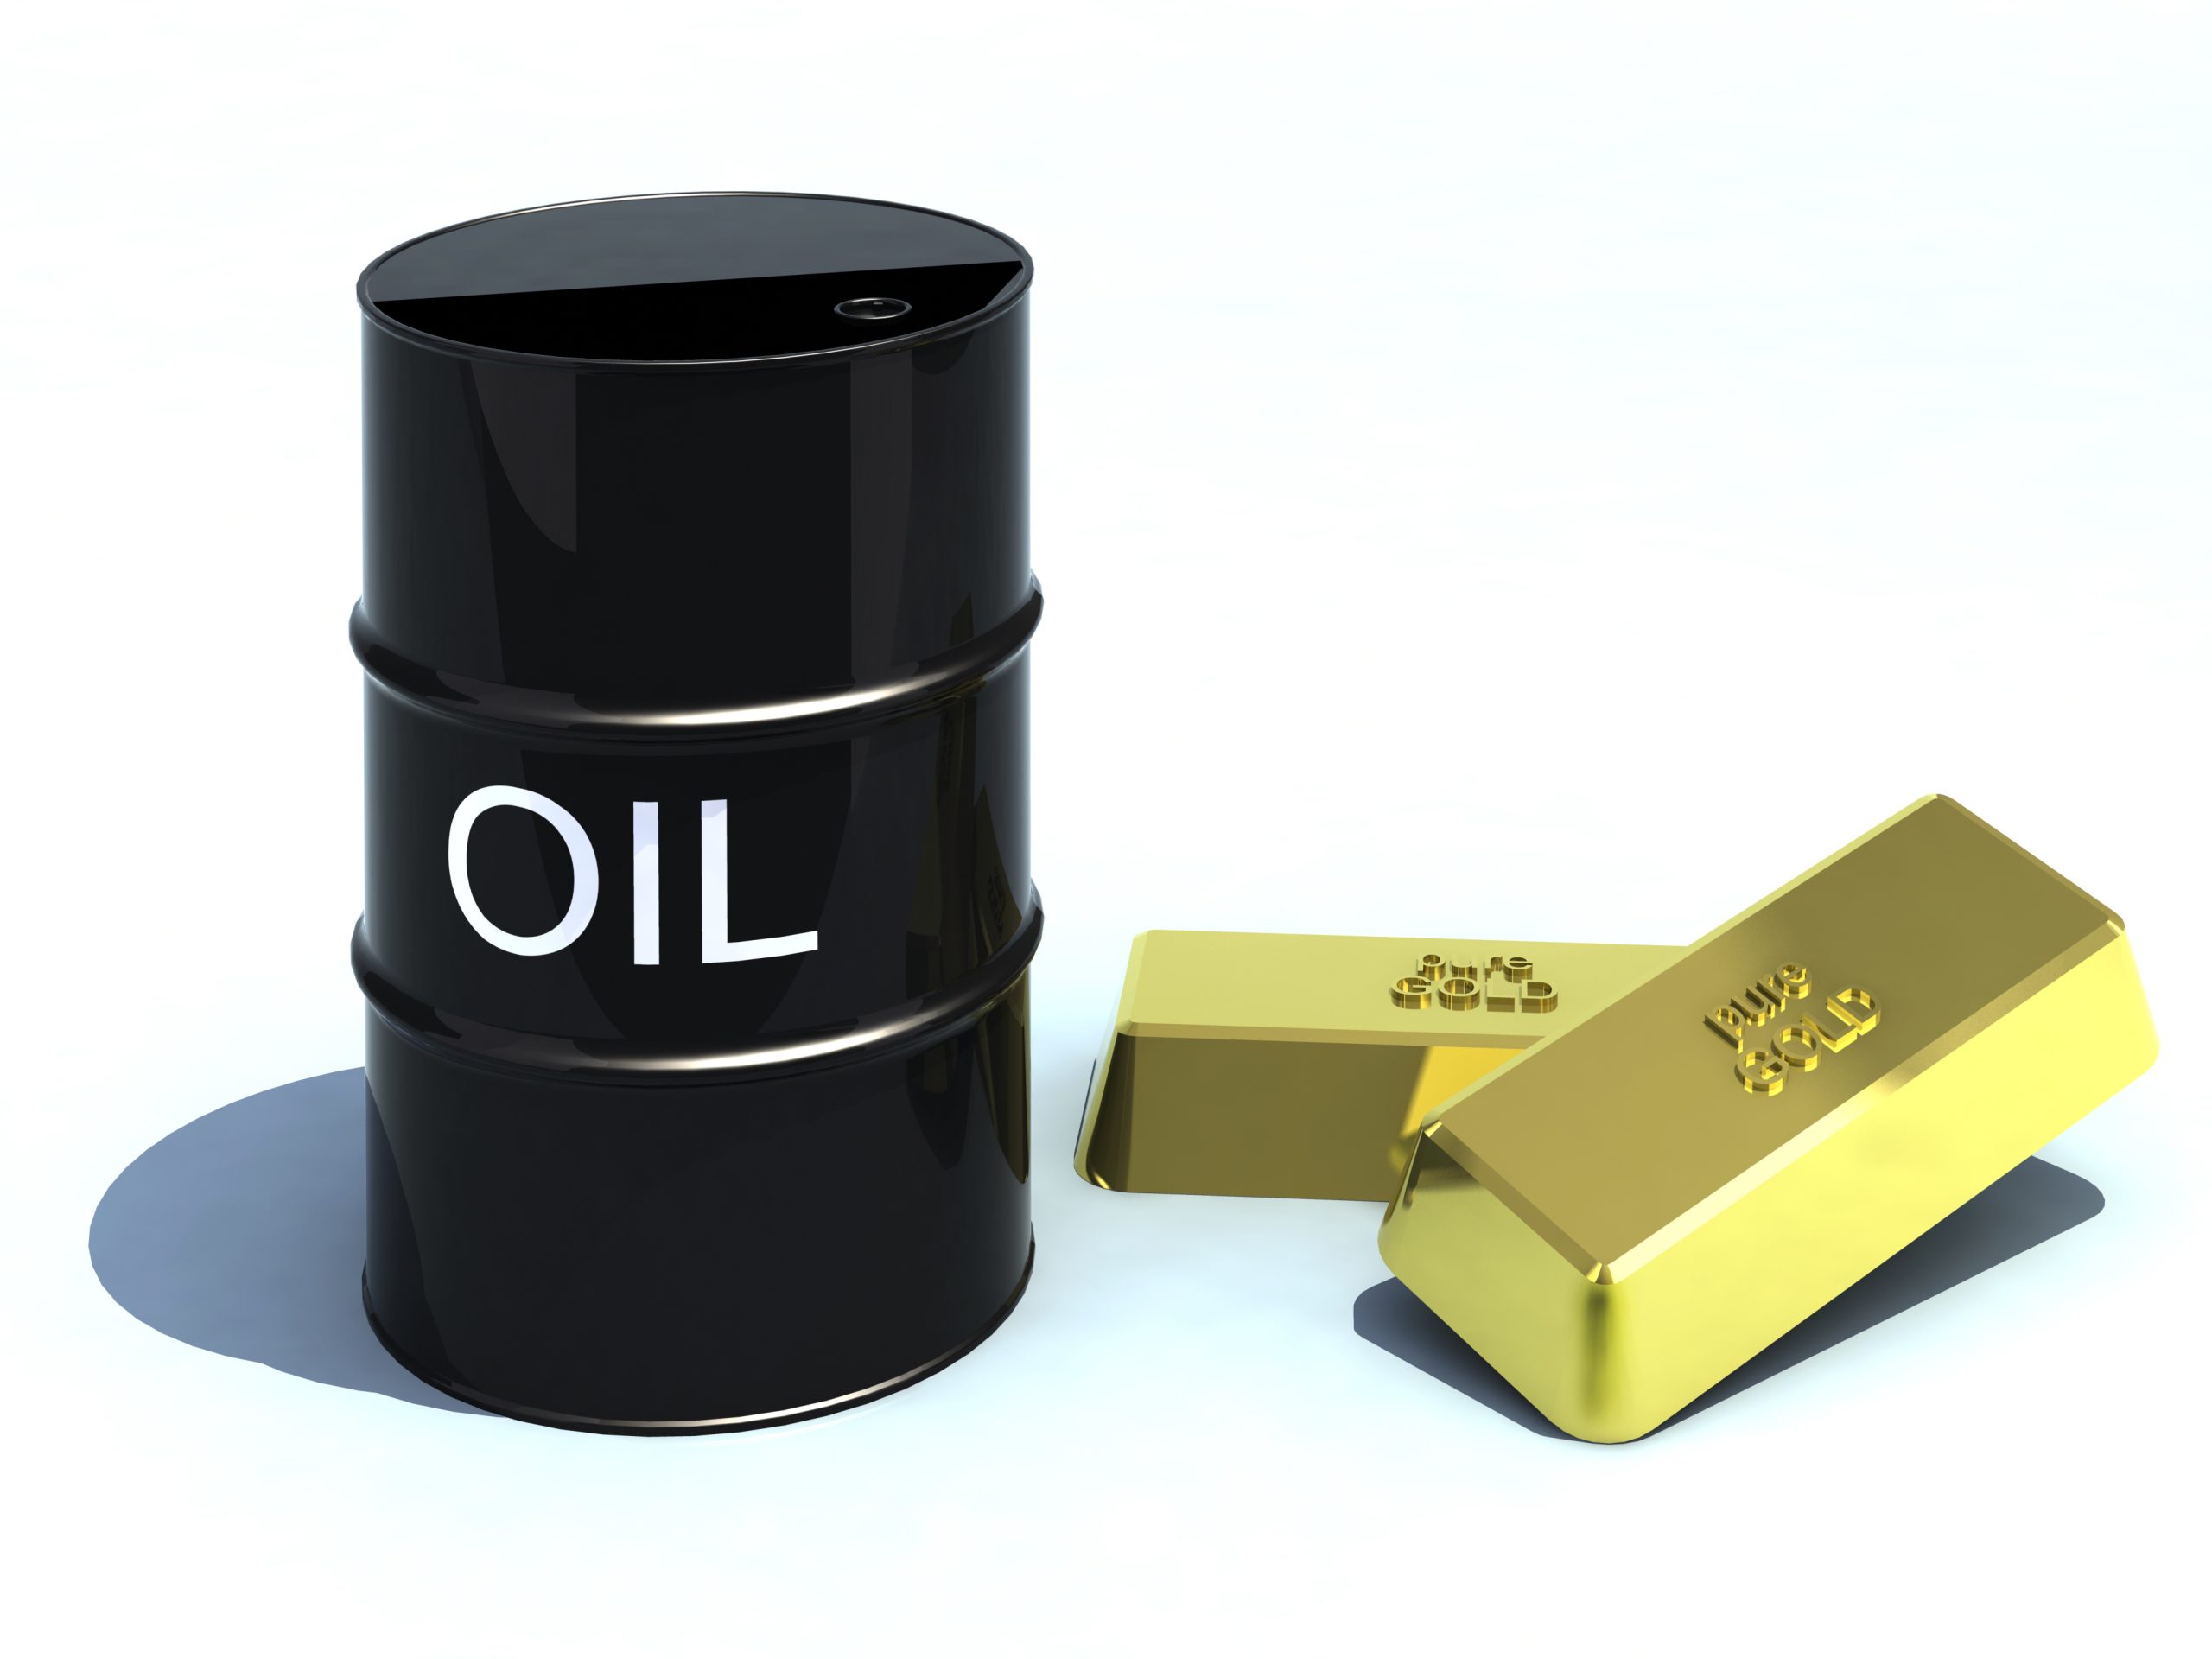 Oil dips, gold rises after Fed, GDP